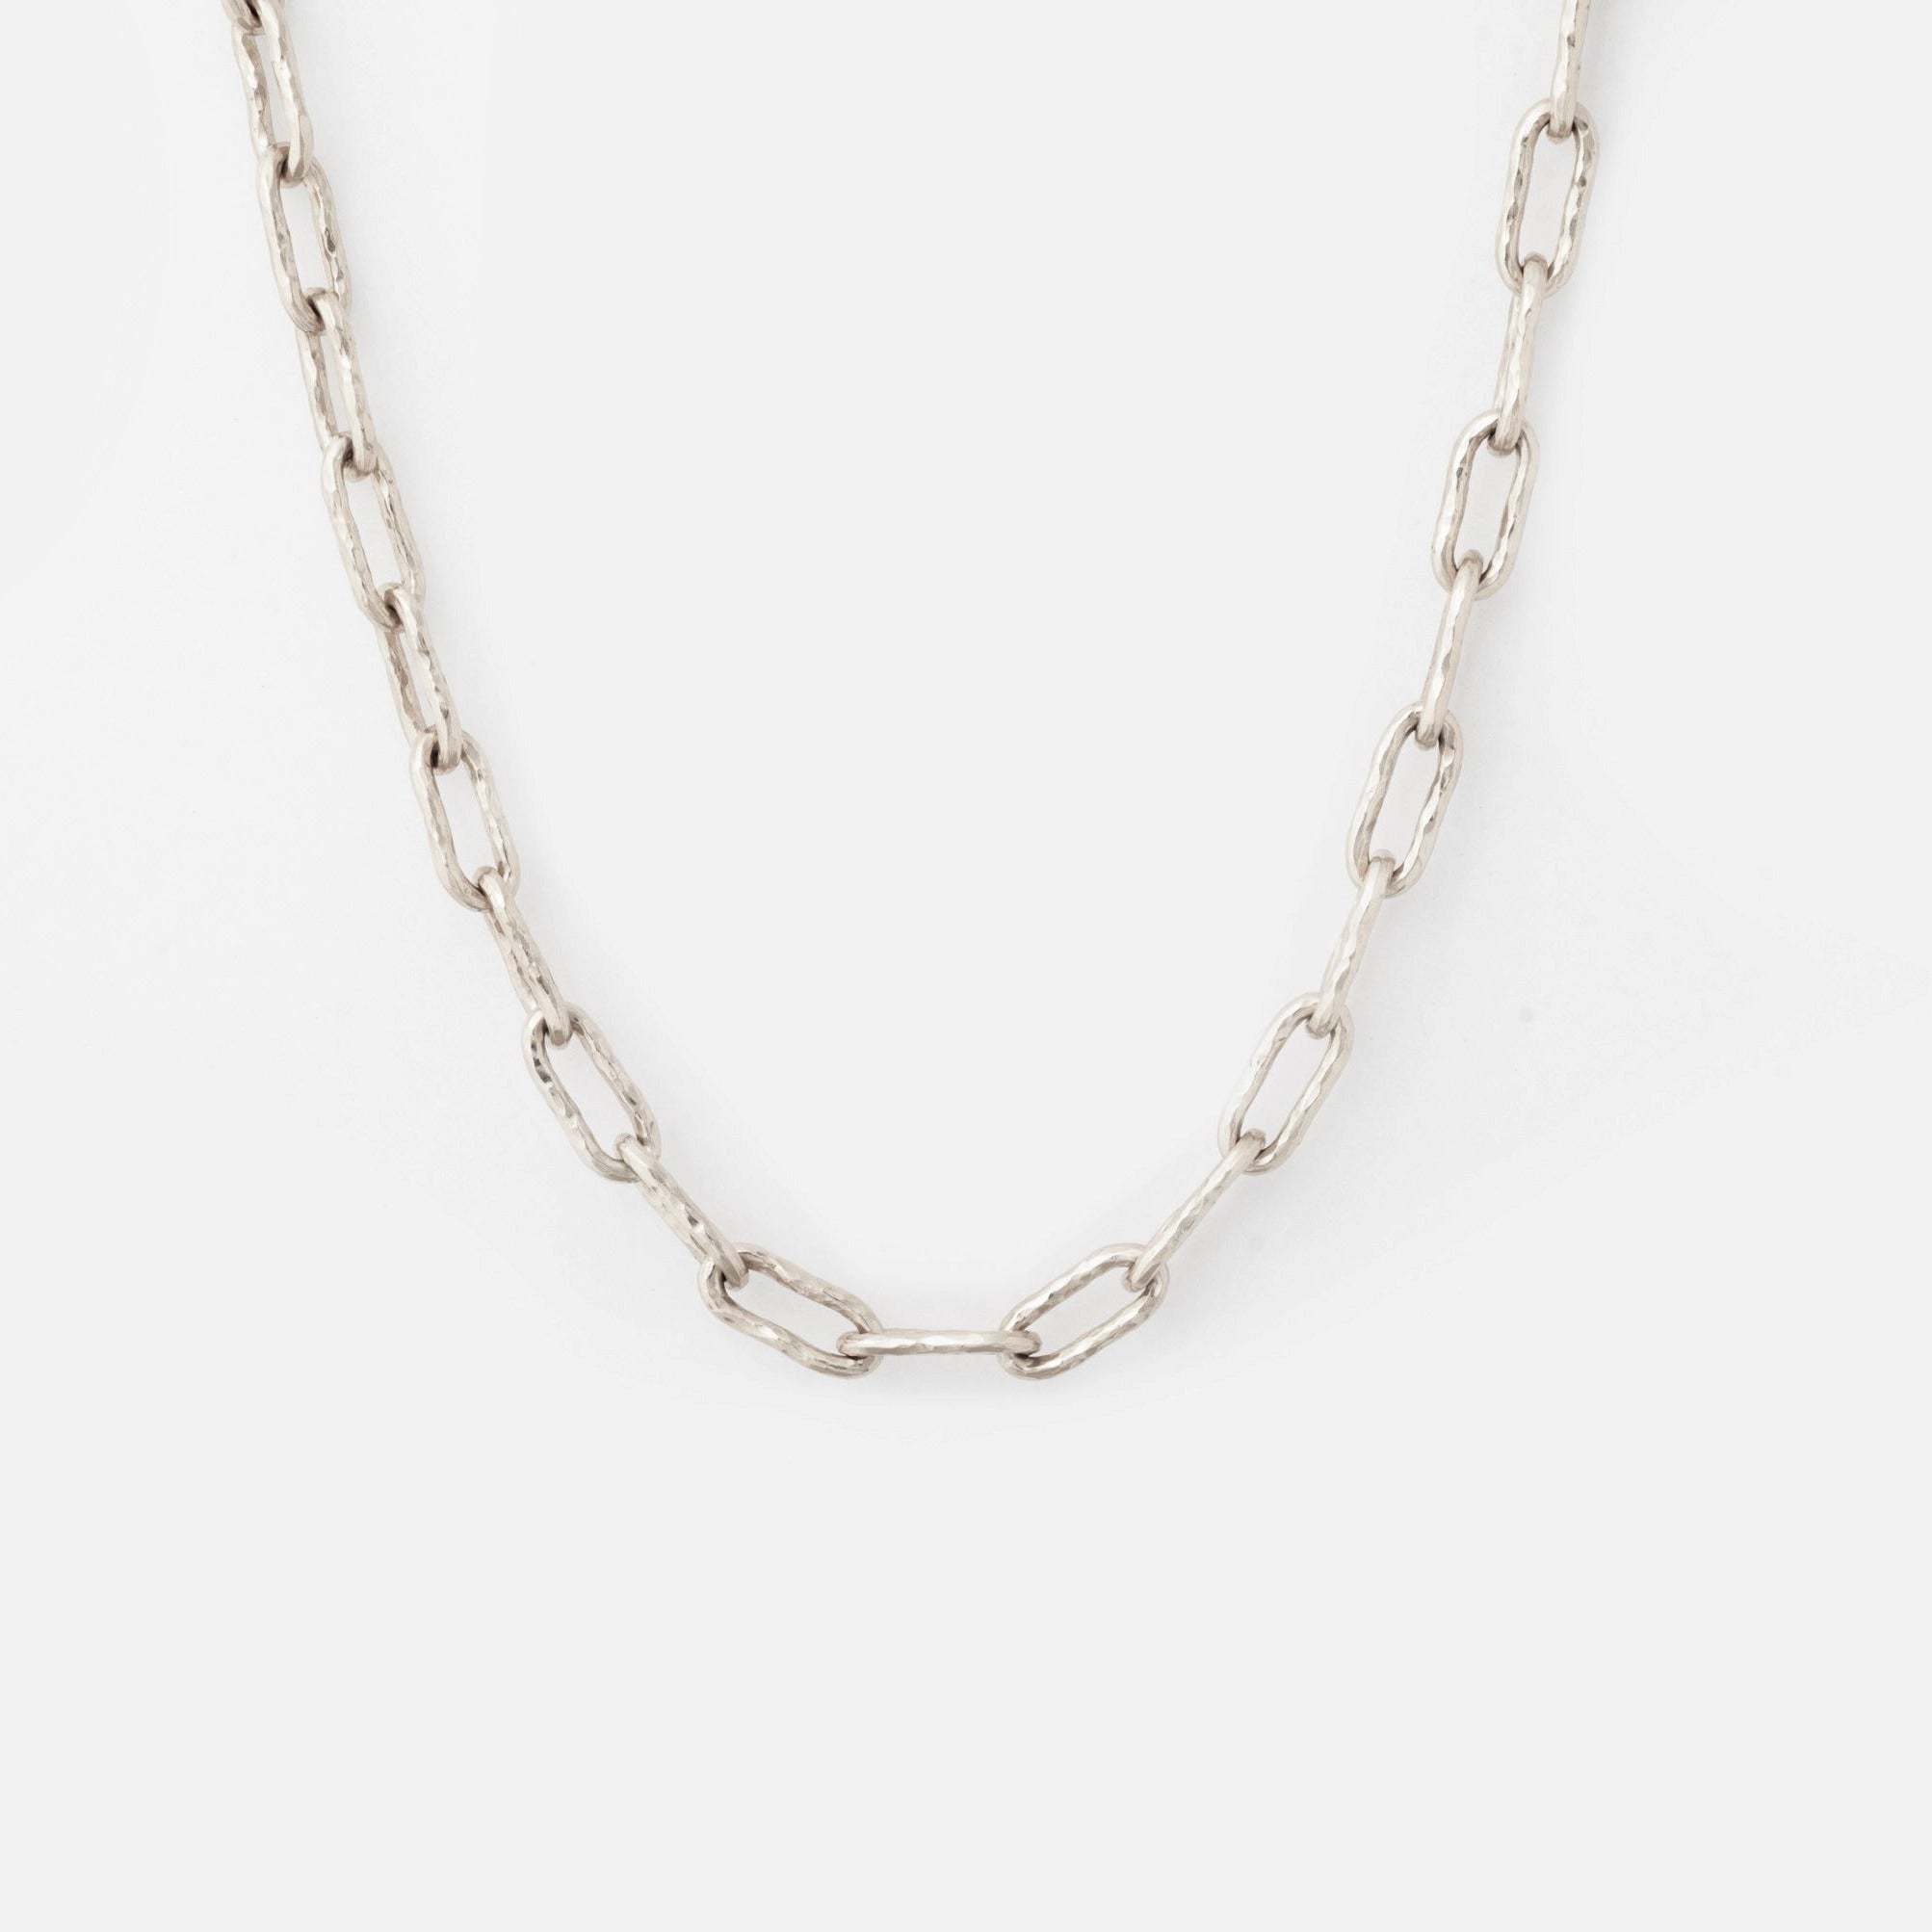 The Hammered Chain Link Necklace